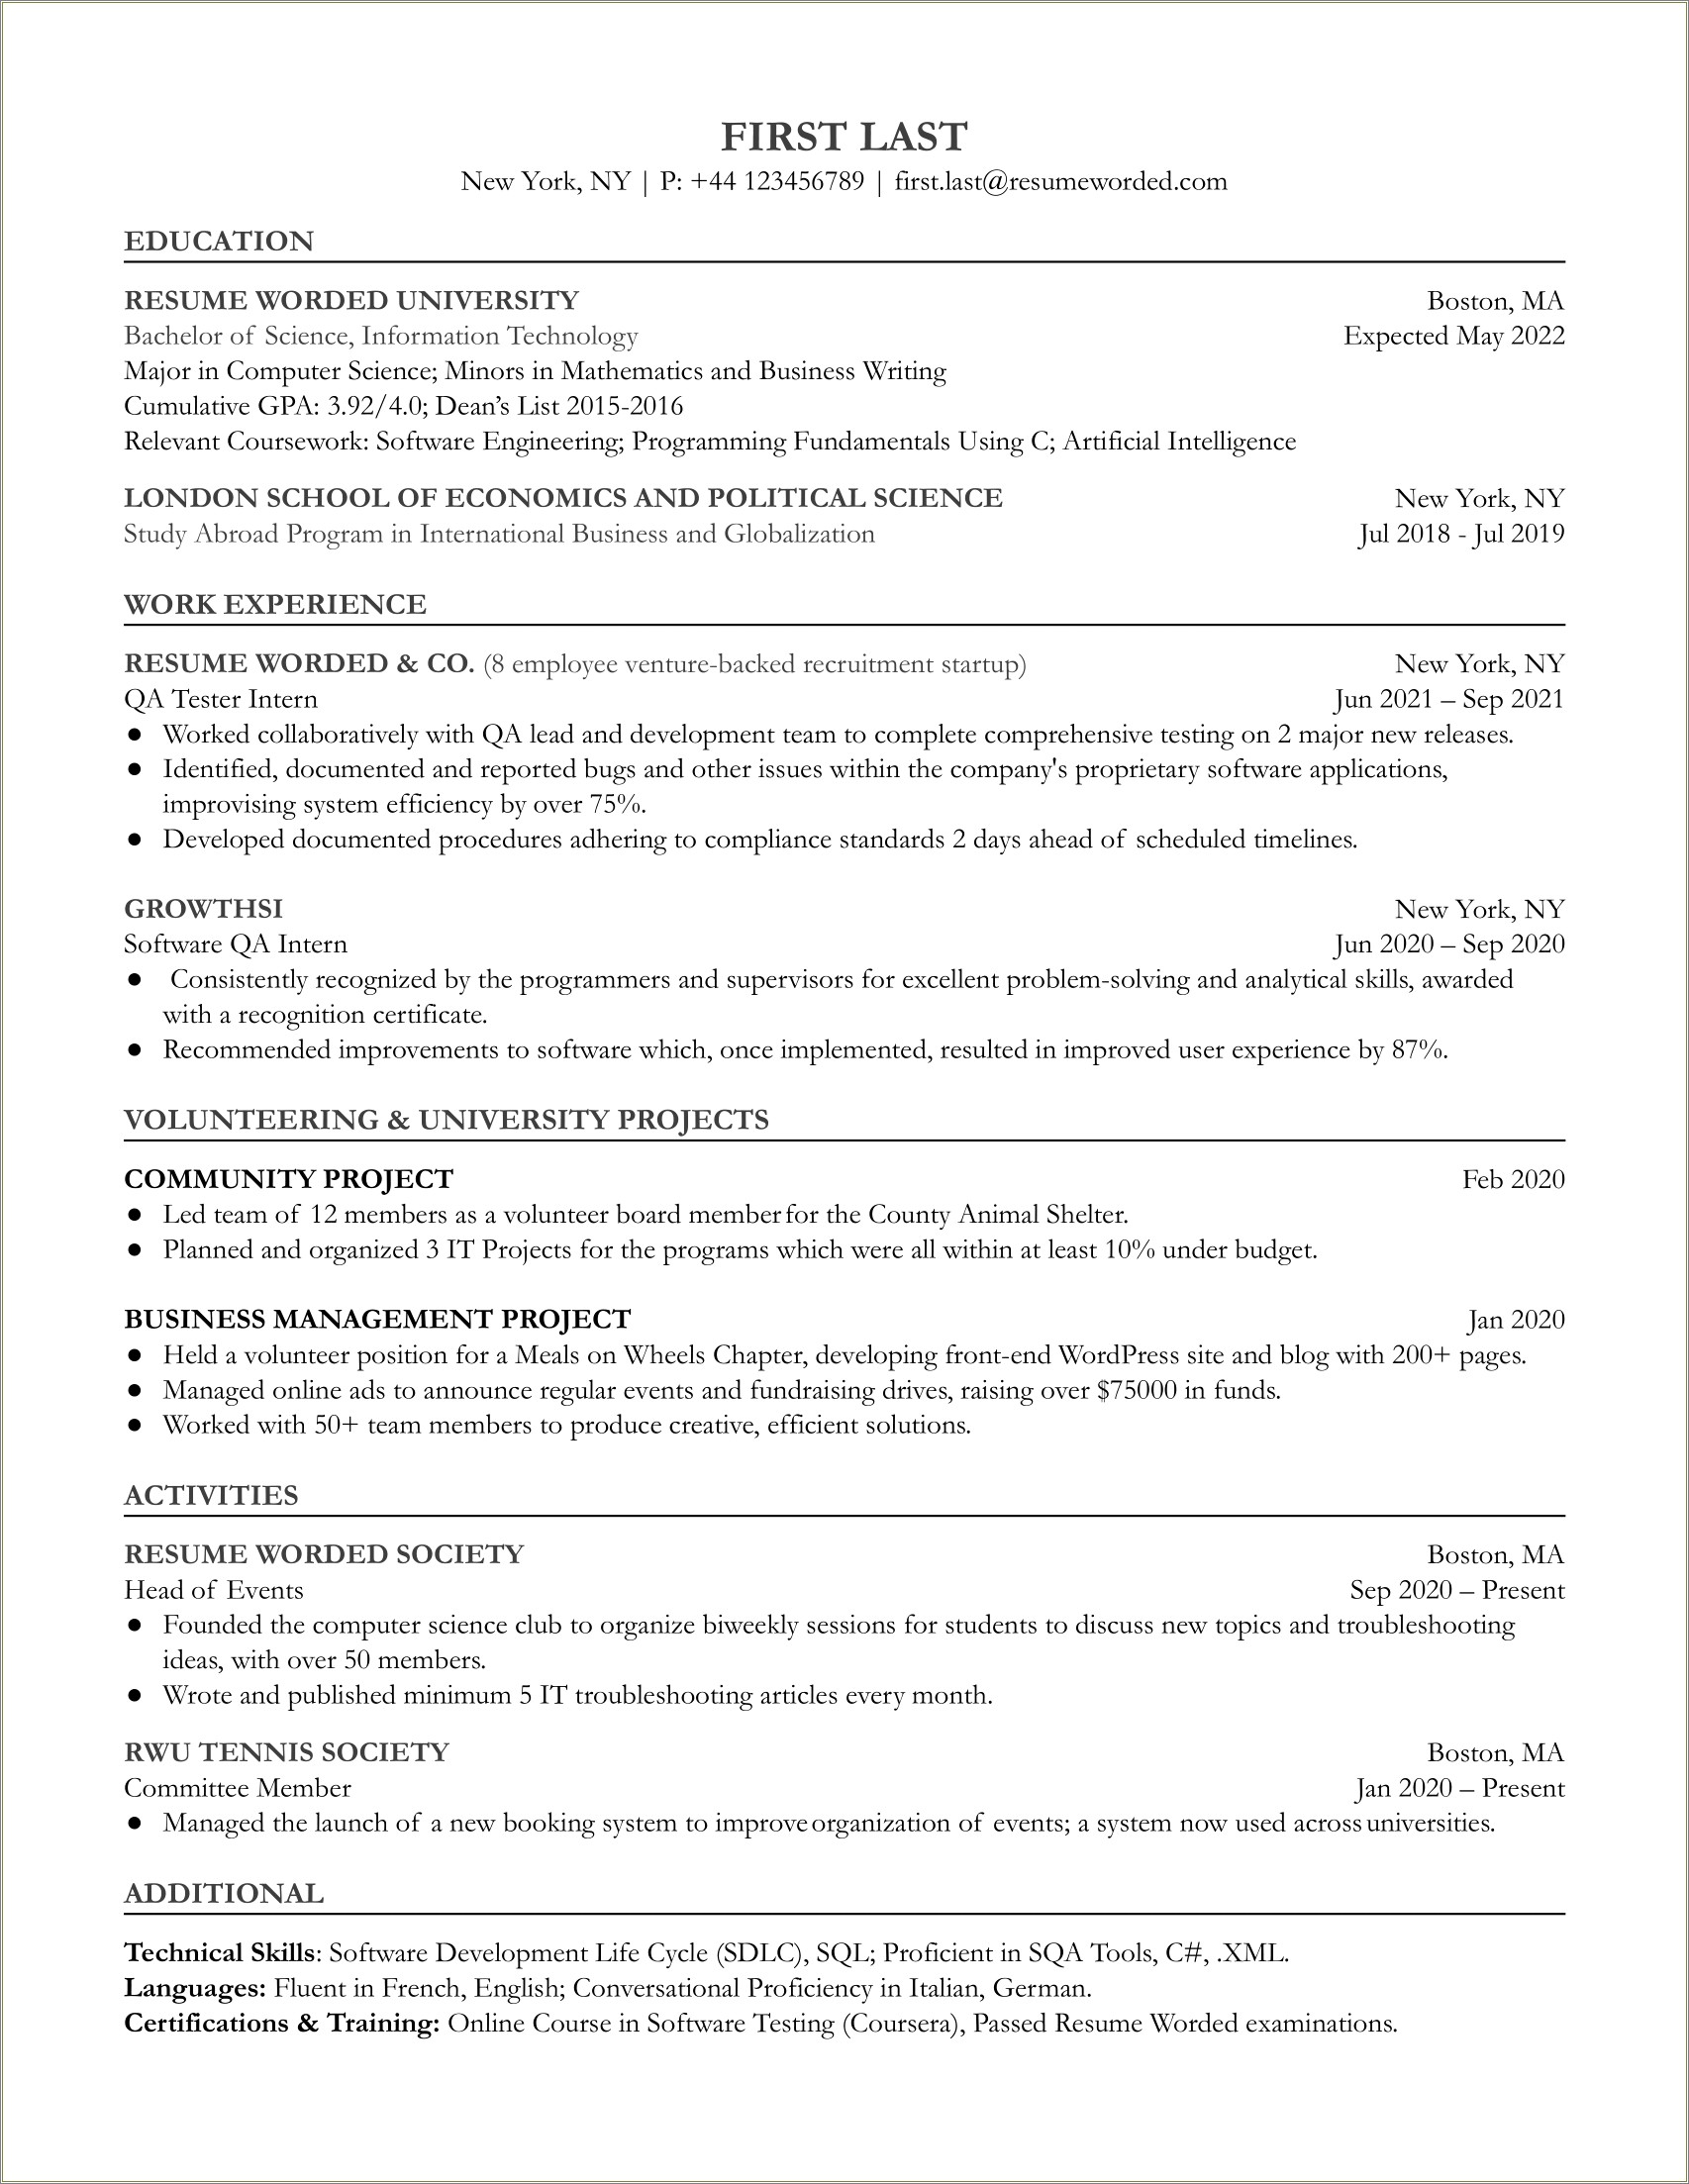 Best Resume Format For Experienced Testing Professionals